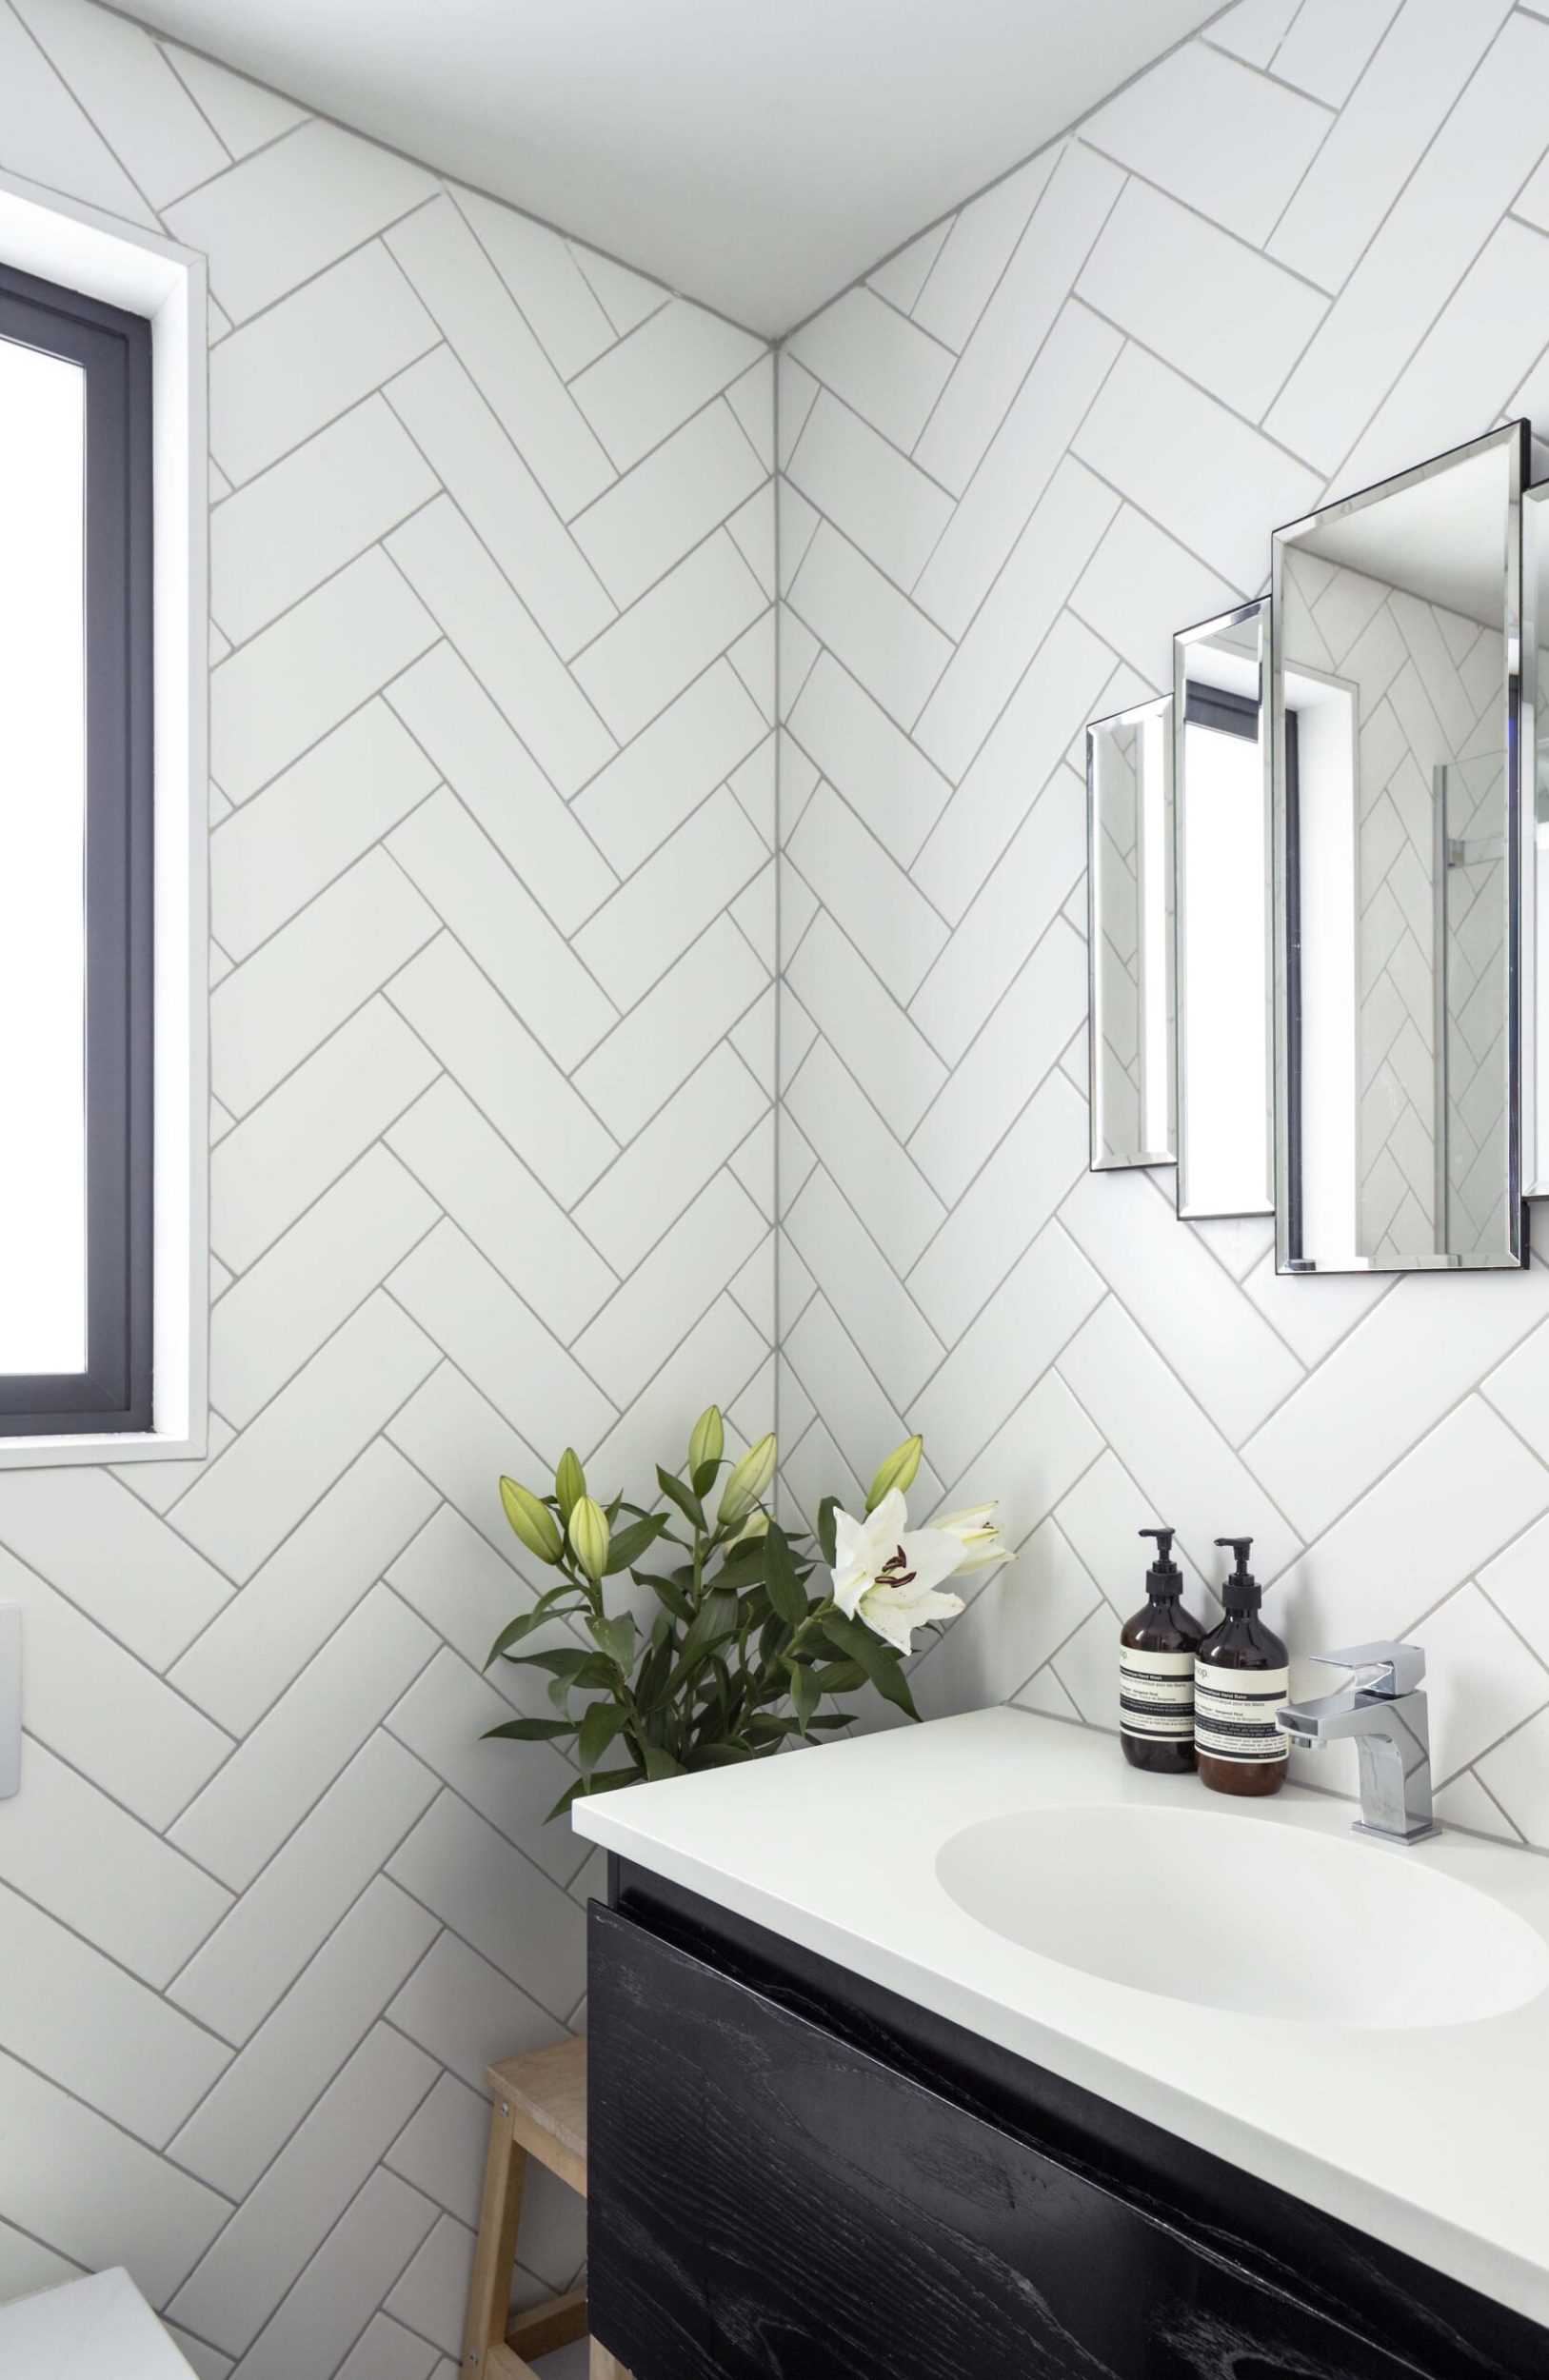 Bathroom with white diagonal subway tiles, a black vanity with a white marble top and geometric mirror